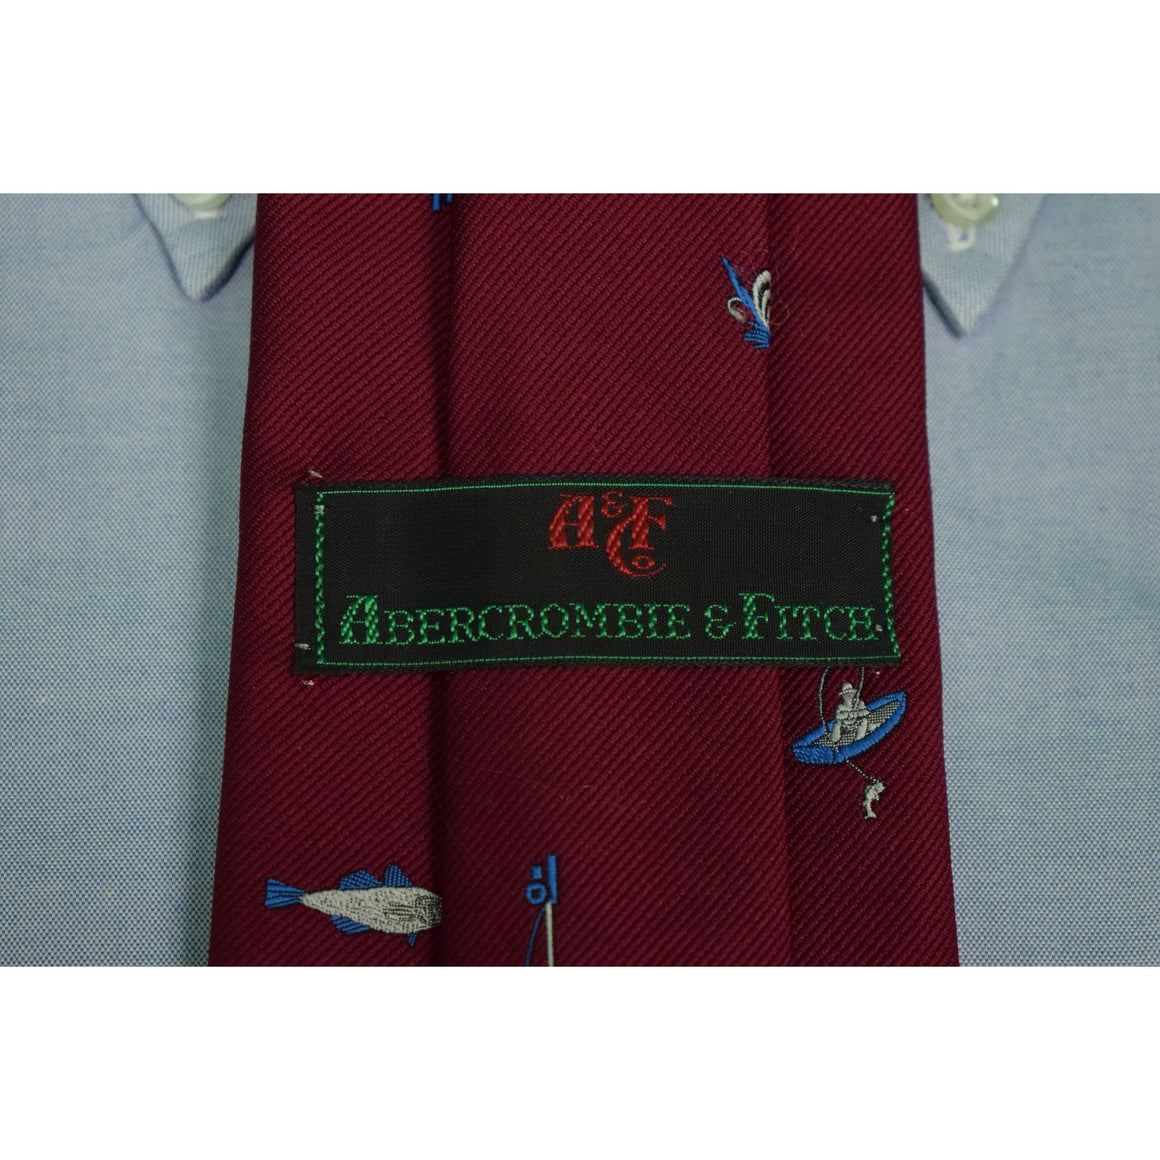 Abercrombie & Fitch Burg Angling Silk Twill Tie